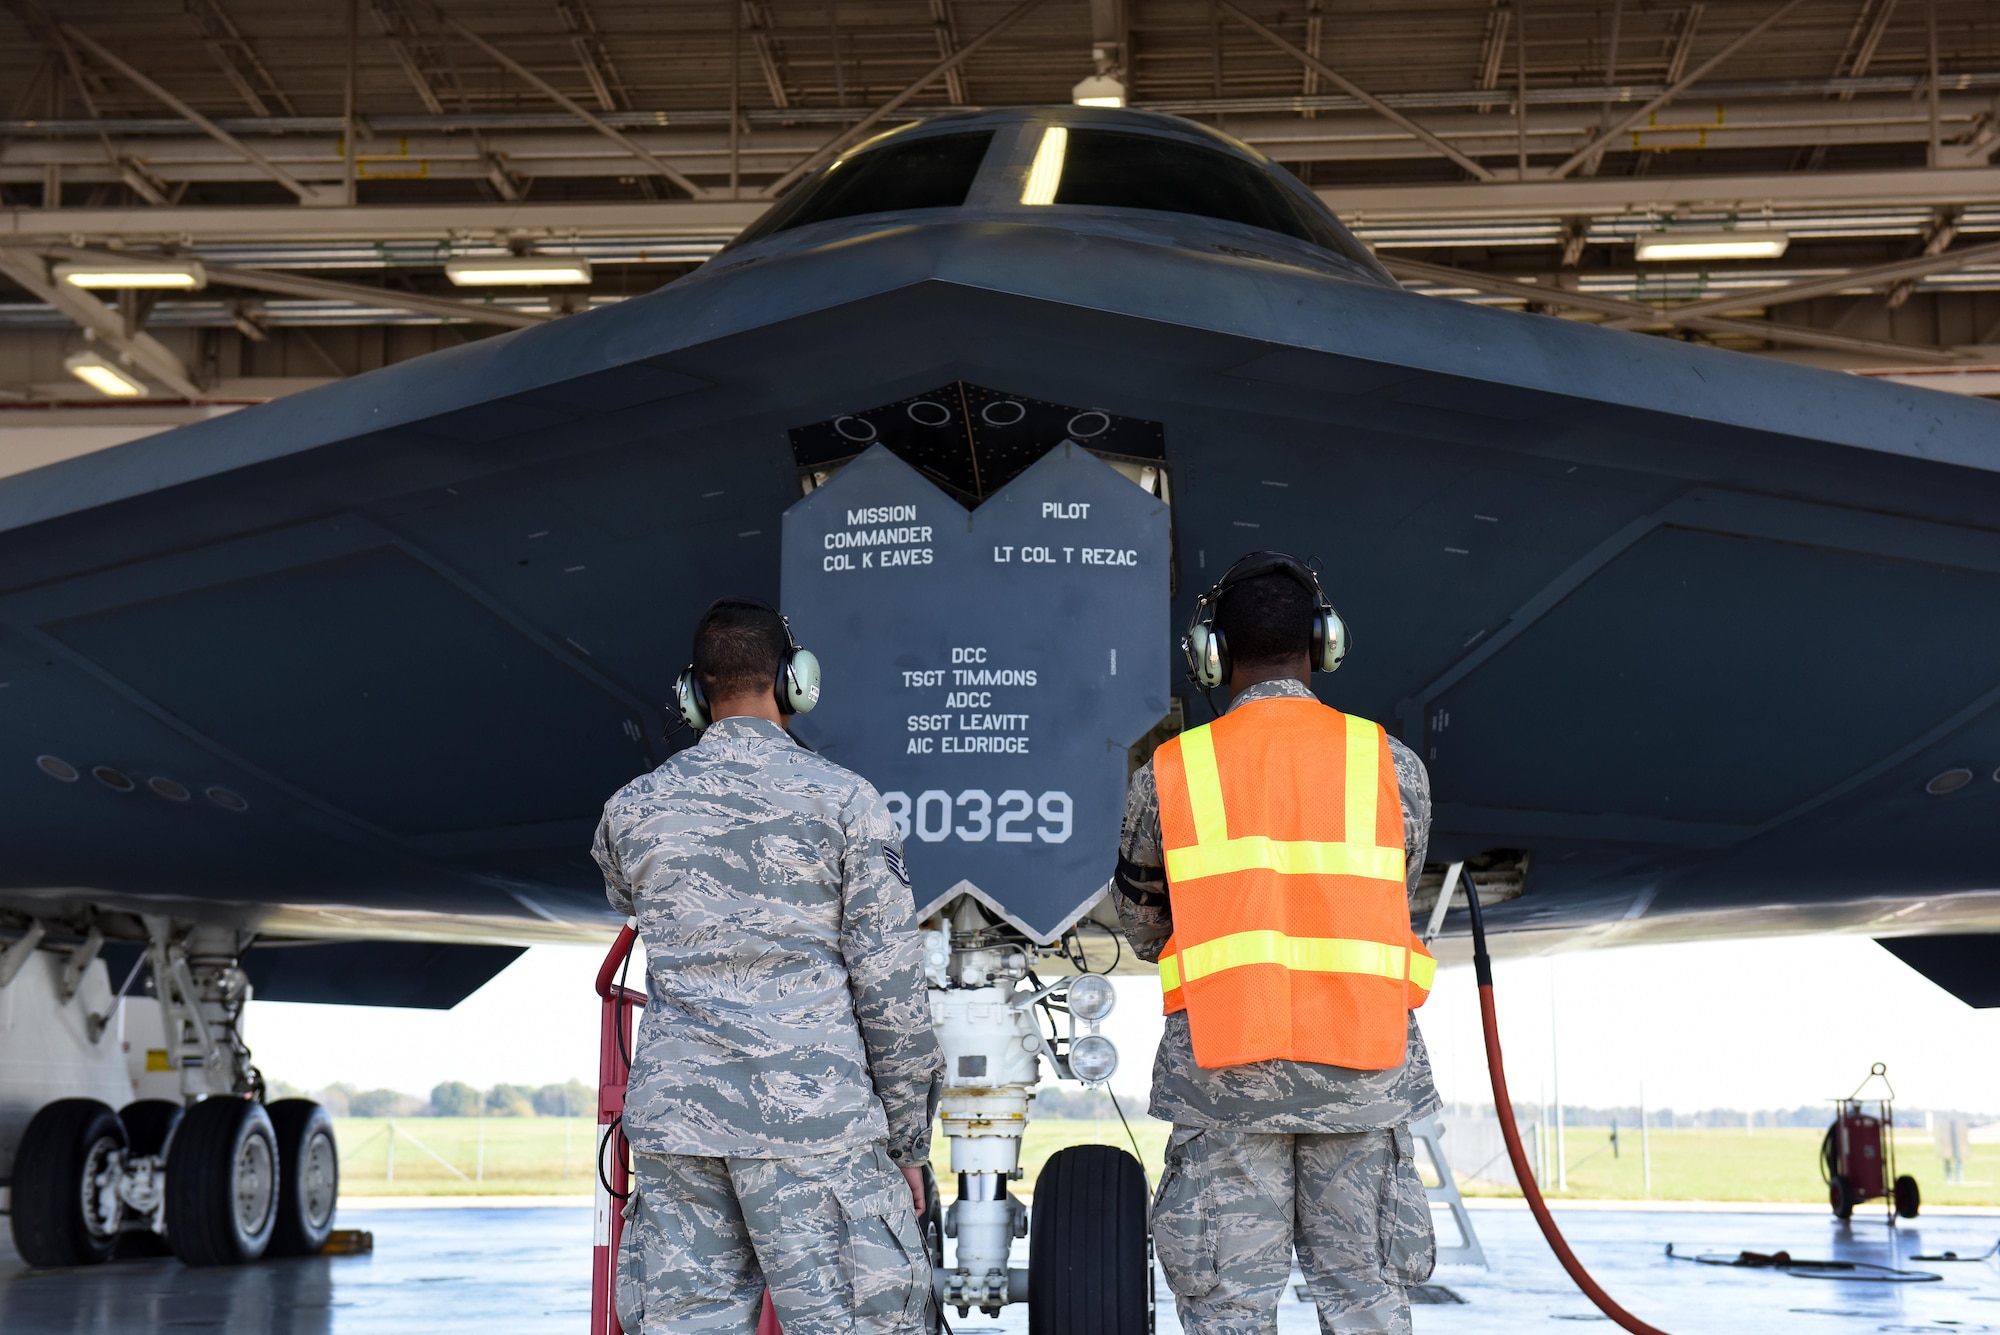 Crew chiefs from the 509th Aircraft Maintenance Squadron prepare a B-2 Spirit for takeoff during Exercise Global Thunder 17 at Whiteman Air Force Base, Mo., Oct. 27, 2016. GT17 is a training opportunity to exercise all U.S. Strategic Command mission areas and create the conditions for strategic deterrence against a variety of threats. (U.S. Air Force photo by Senior Airman Joel Pfiester)